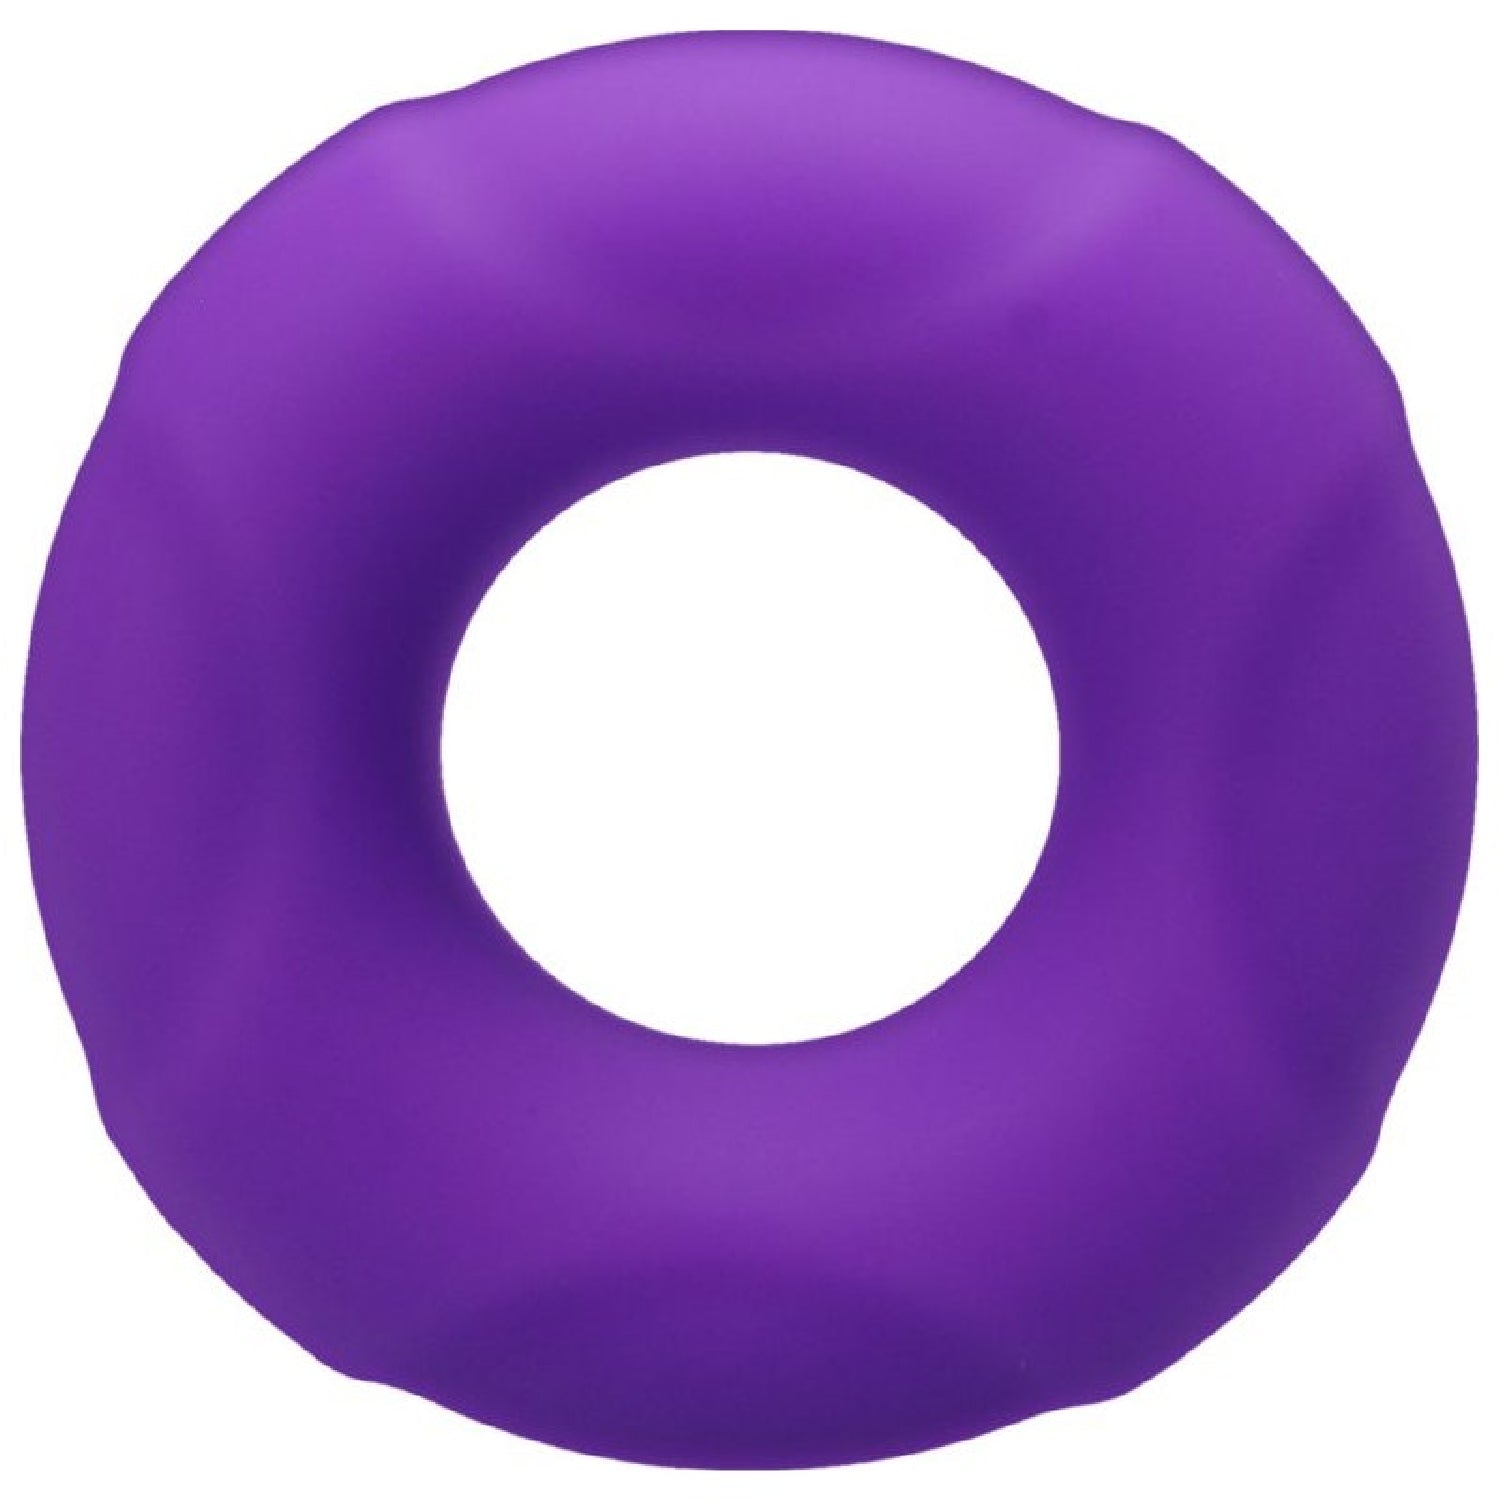 Buoy C-Ring Small - Lilac